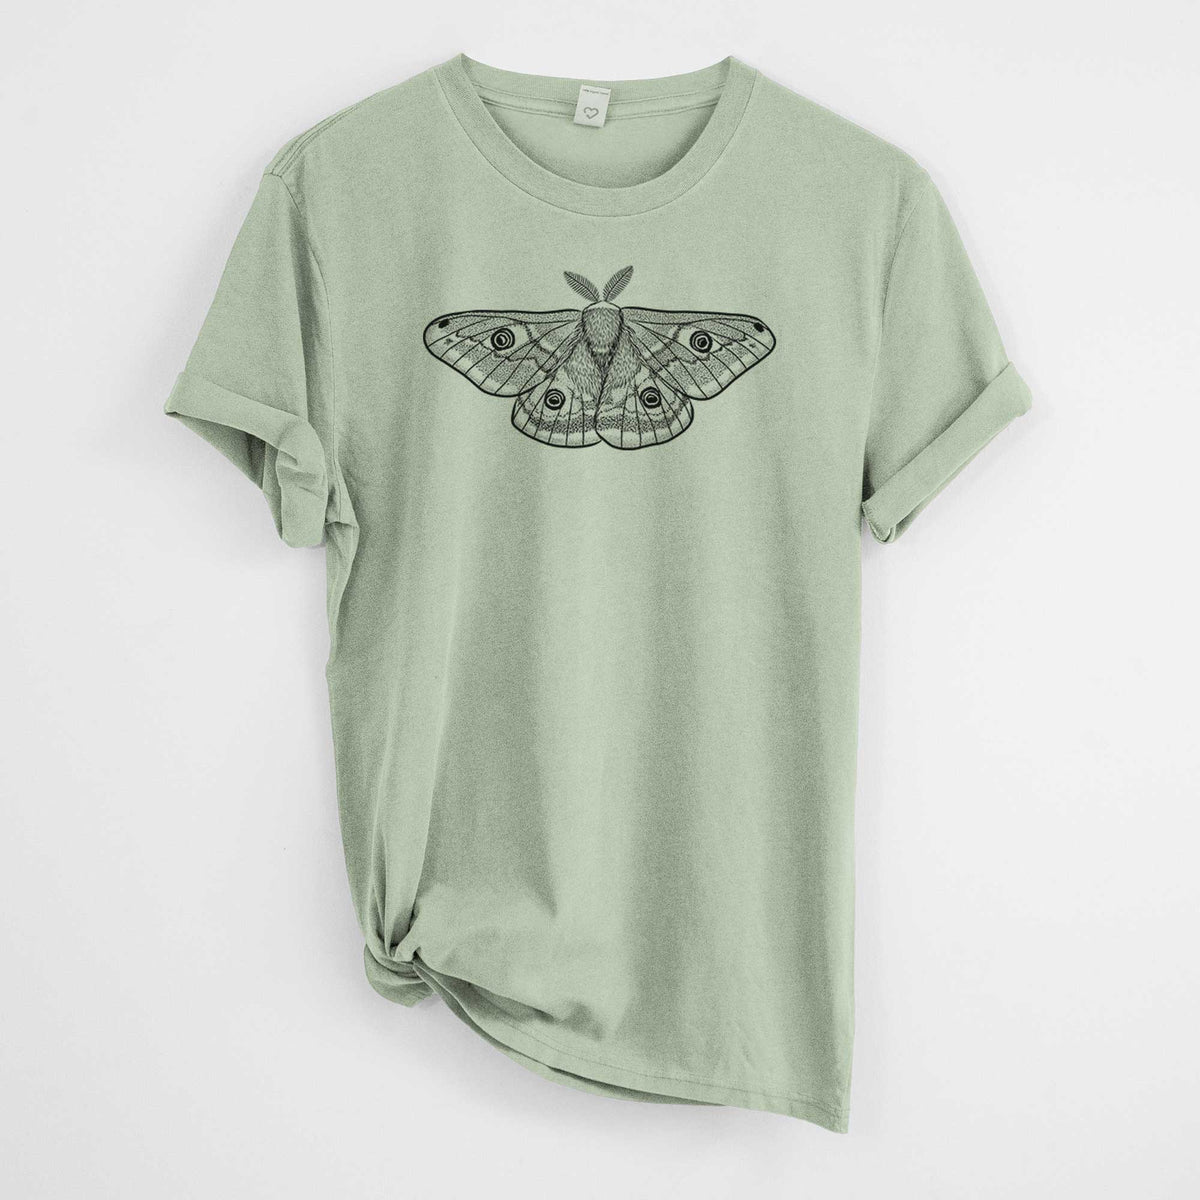 Saturnia pavonia - Small Emperor Moth -  Mineral Wash 100% Organic Cotton Short Sleeve